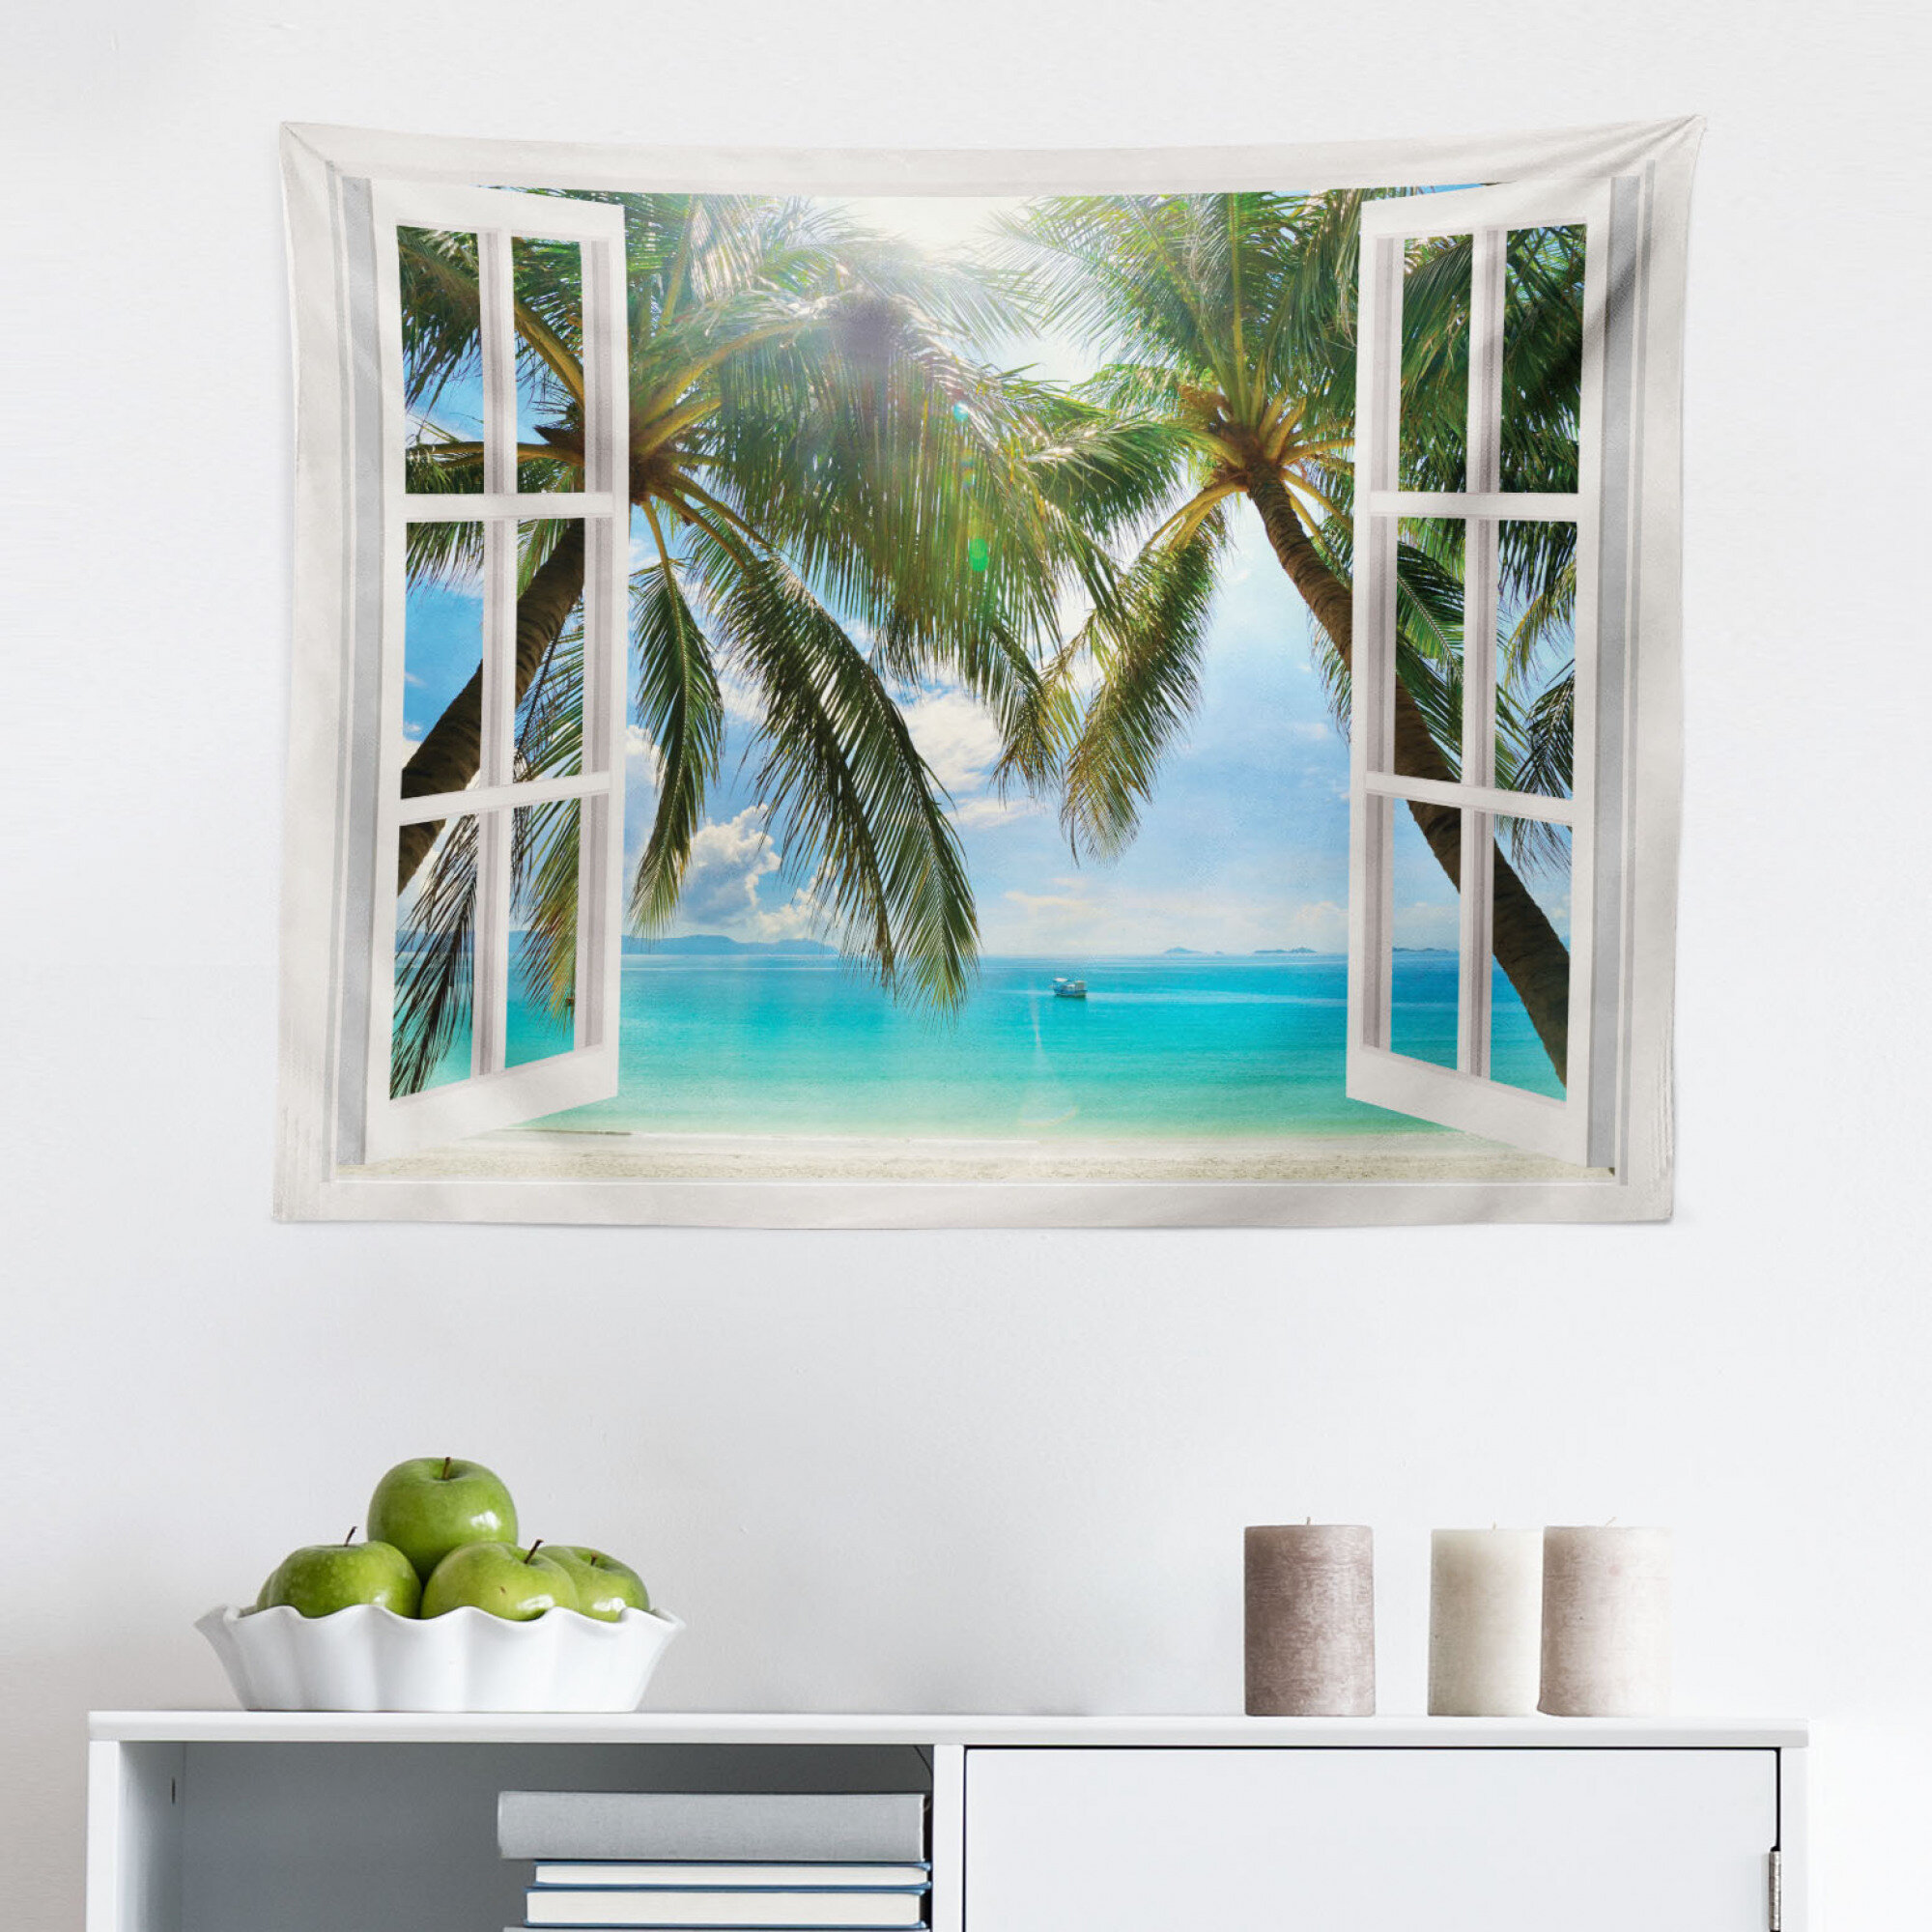 Cloth Fabric Bathroom Decor Set with Hooks Window to The Exotic Beach Hawaiian Landscape Pastoral Composition with Palm Trees Ambesonne Tropical Shower Curtain 75 Inches Long Aqua Green 